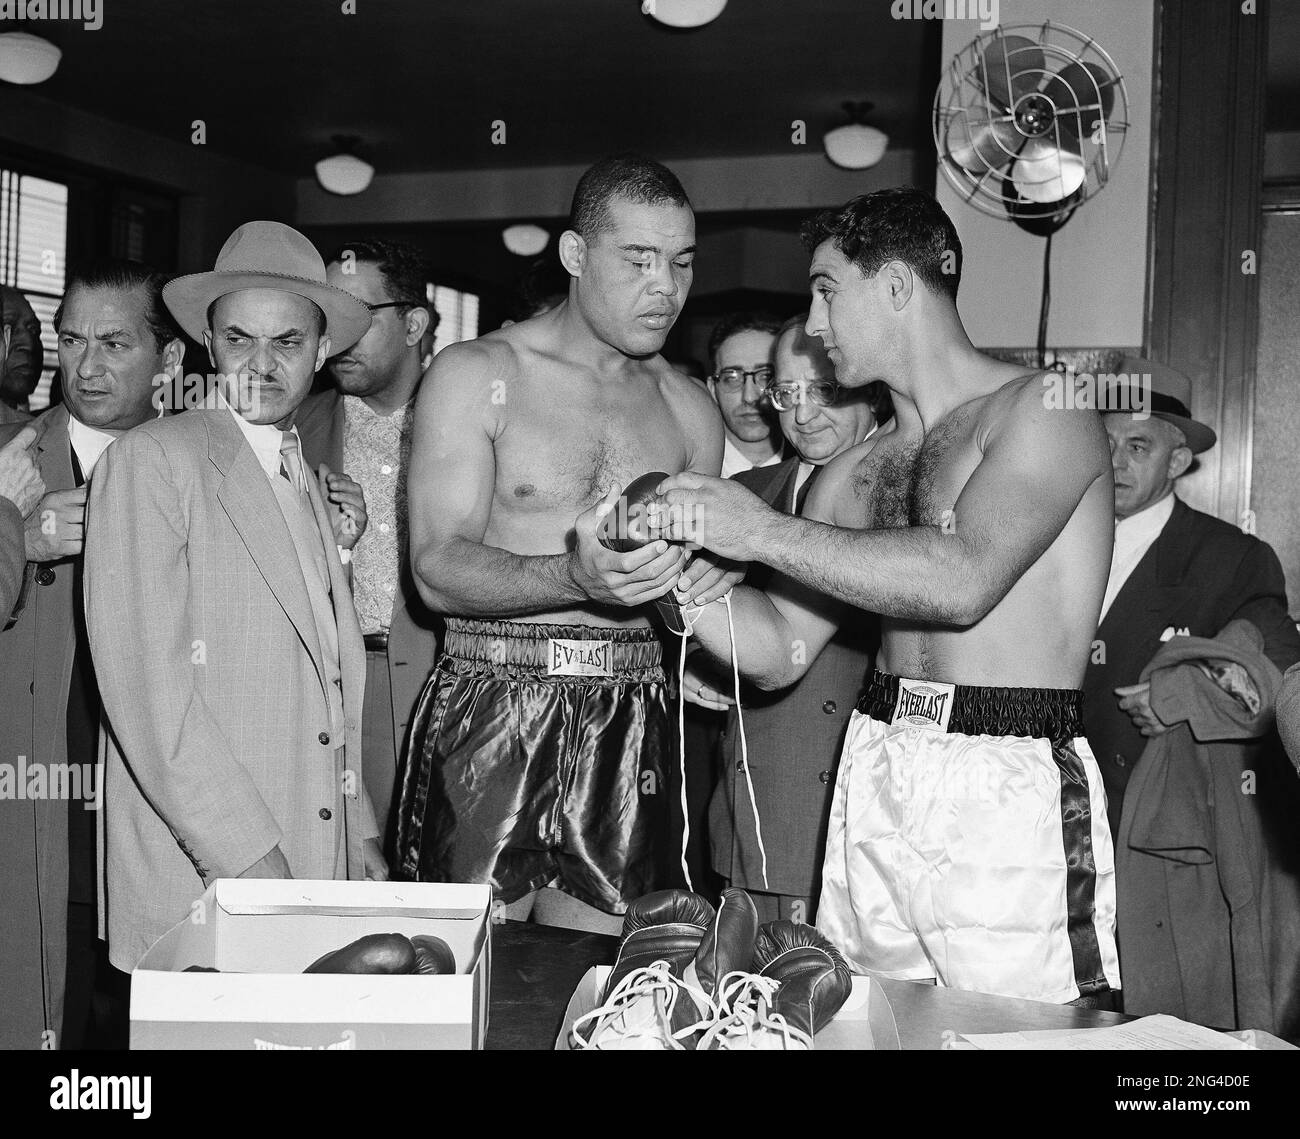 https://c8.alamy.com/comp/2NG4D0E/joe-louis-left-and-his-opponent-oct-26-1951-in-a-ten-round-heavyweight-bout-rocky-marciano-right-of-brockton-mass-check-over-the-gloves-they-will-wear-watching-center-is-deputy-state-athletic-commissioner-ralph-halpern-the-glove-checking-took-place-during-wieght-in-ceremonies-louis-weighted-212-34-and-marciano-187-pounds-ap-photoanthony-camerano-2NG4D0E.jpg